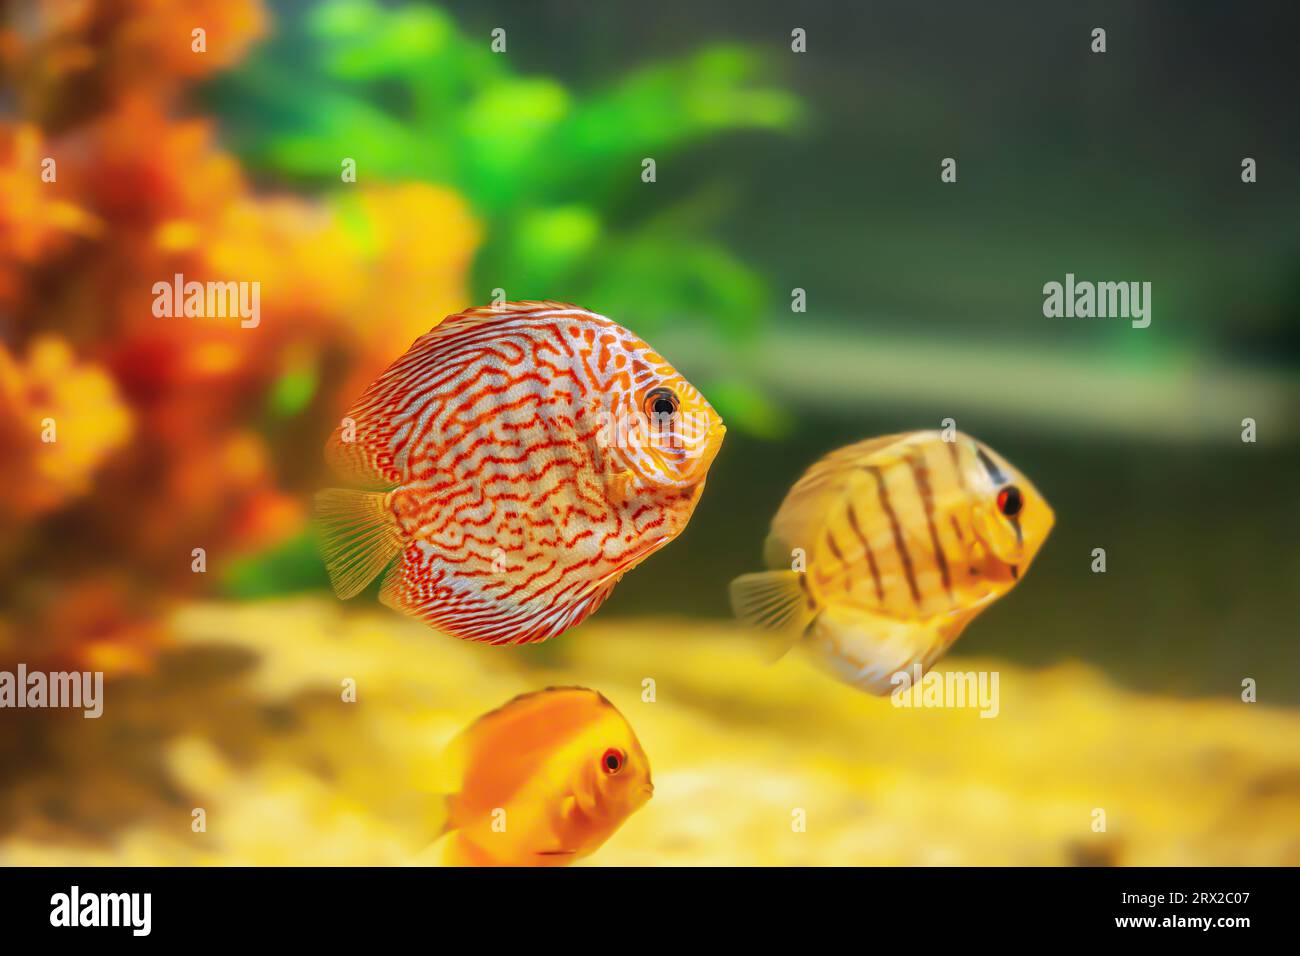 Pompadour small fish swimming in aquarium. Red Symphysodon discus swims in fishtank, side view Stock Photo